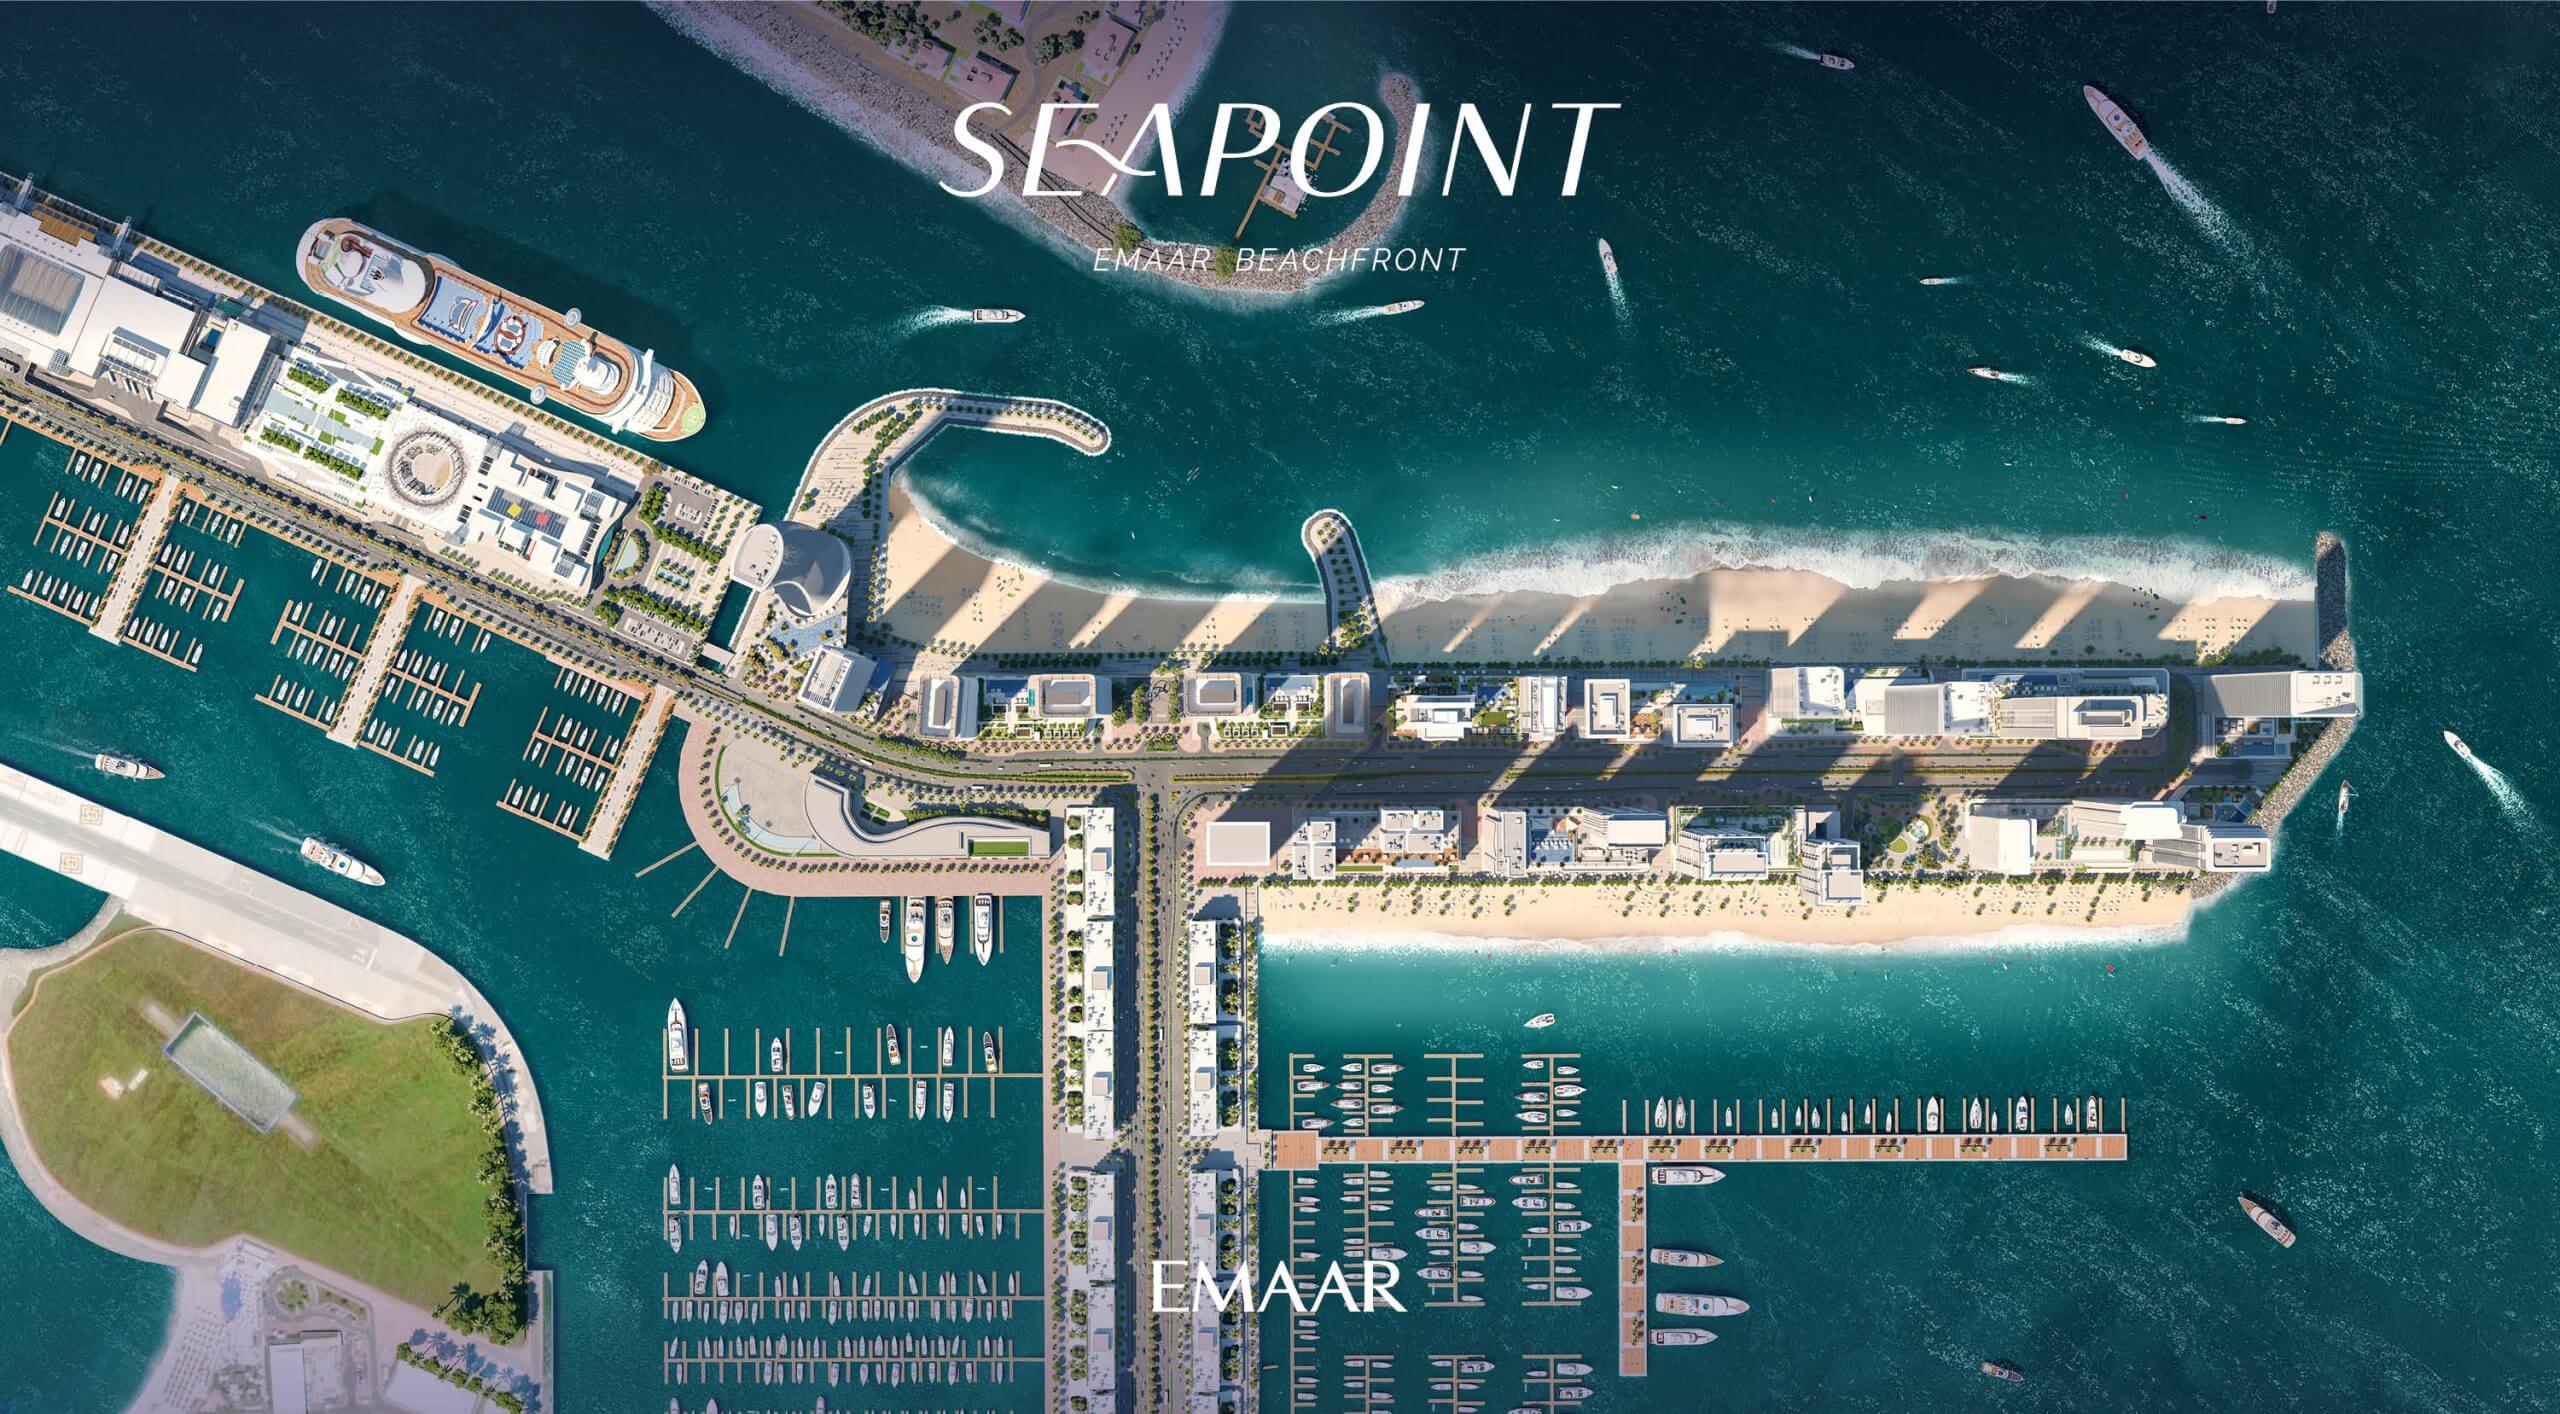 Seapoint Emaar Beachfront Properties in Dubai by PJ International Real Estate Agency - Luxurious beachfront living with stunning views.